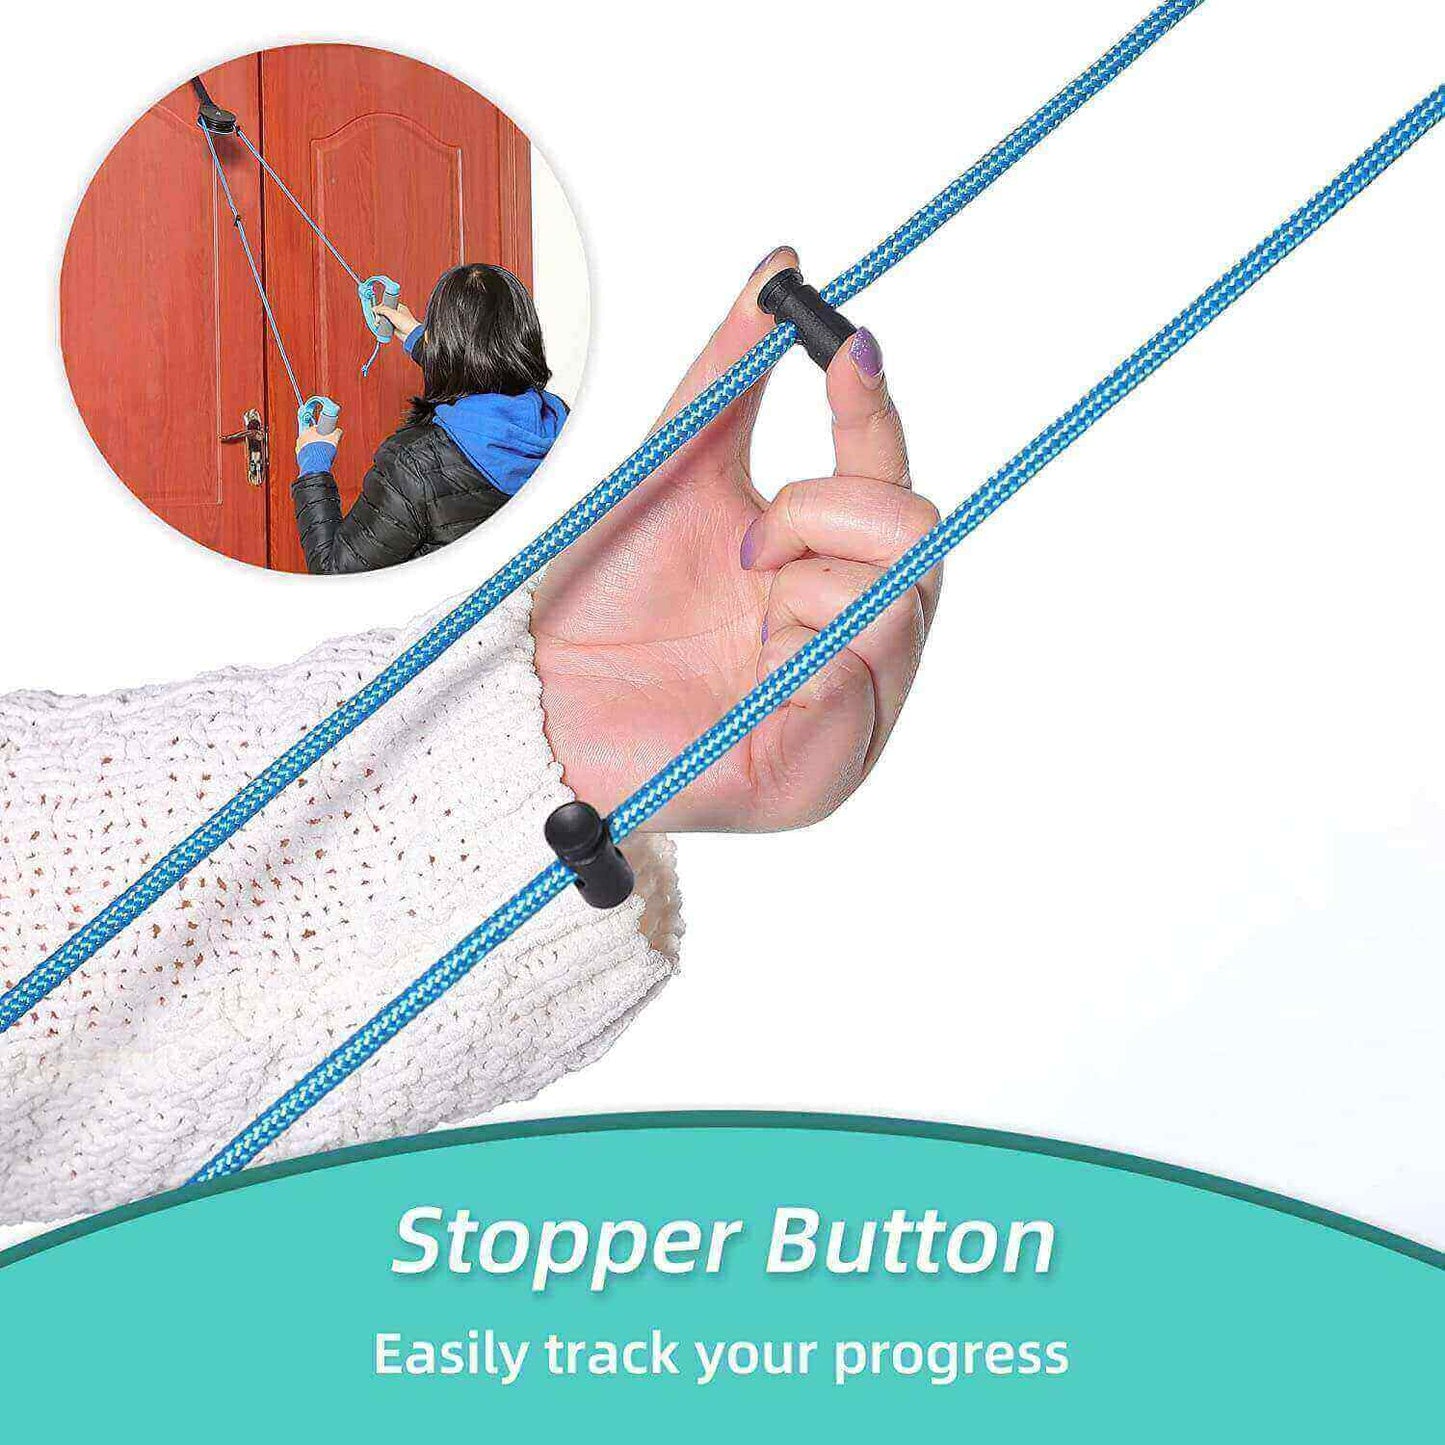 Fanwer Shoulder Pulley for Exercise Therapy, Frozen Shoulder Exercise, the strings